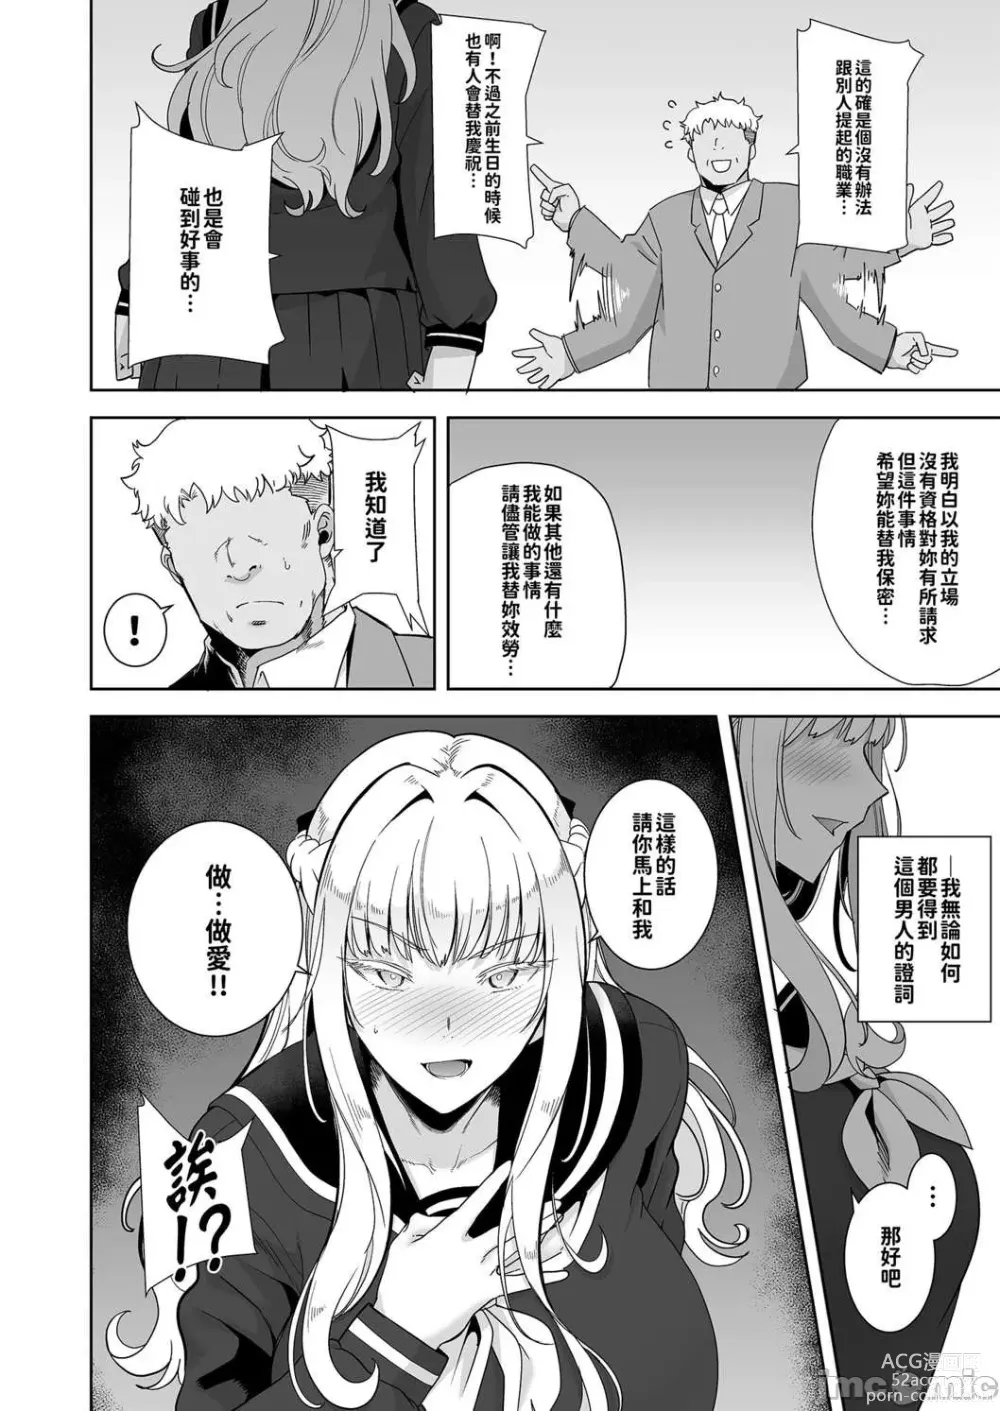 Page 10 of doujinshi 聖華女学院高等部公認竿おじさん 4